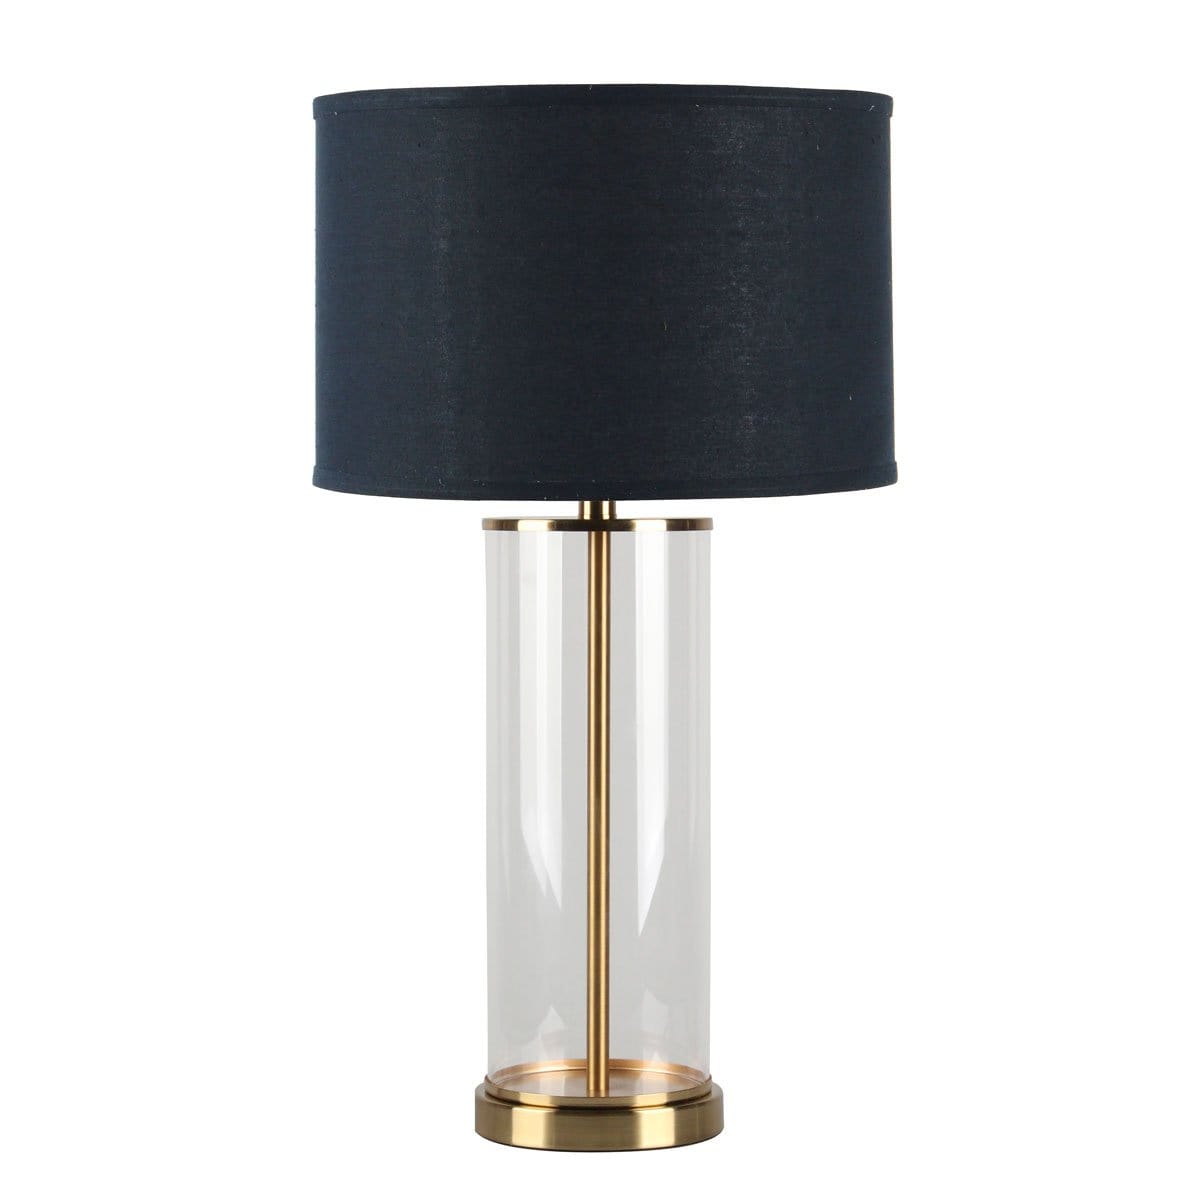 CAFE LIGHTING & LIVING Table Lamp Left Bank Table Lamp - Brass w Navy Shade B12270